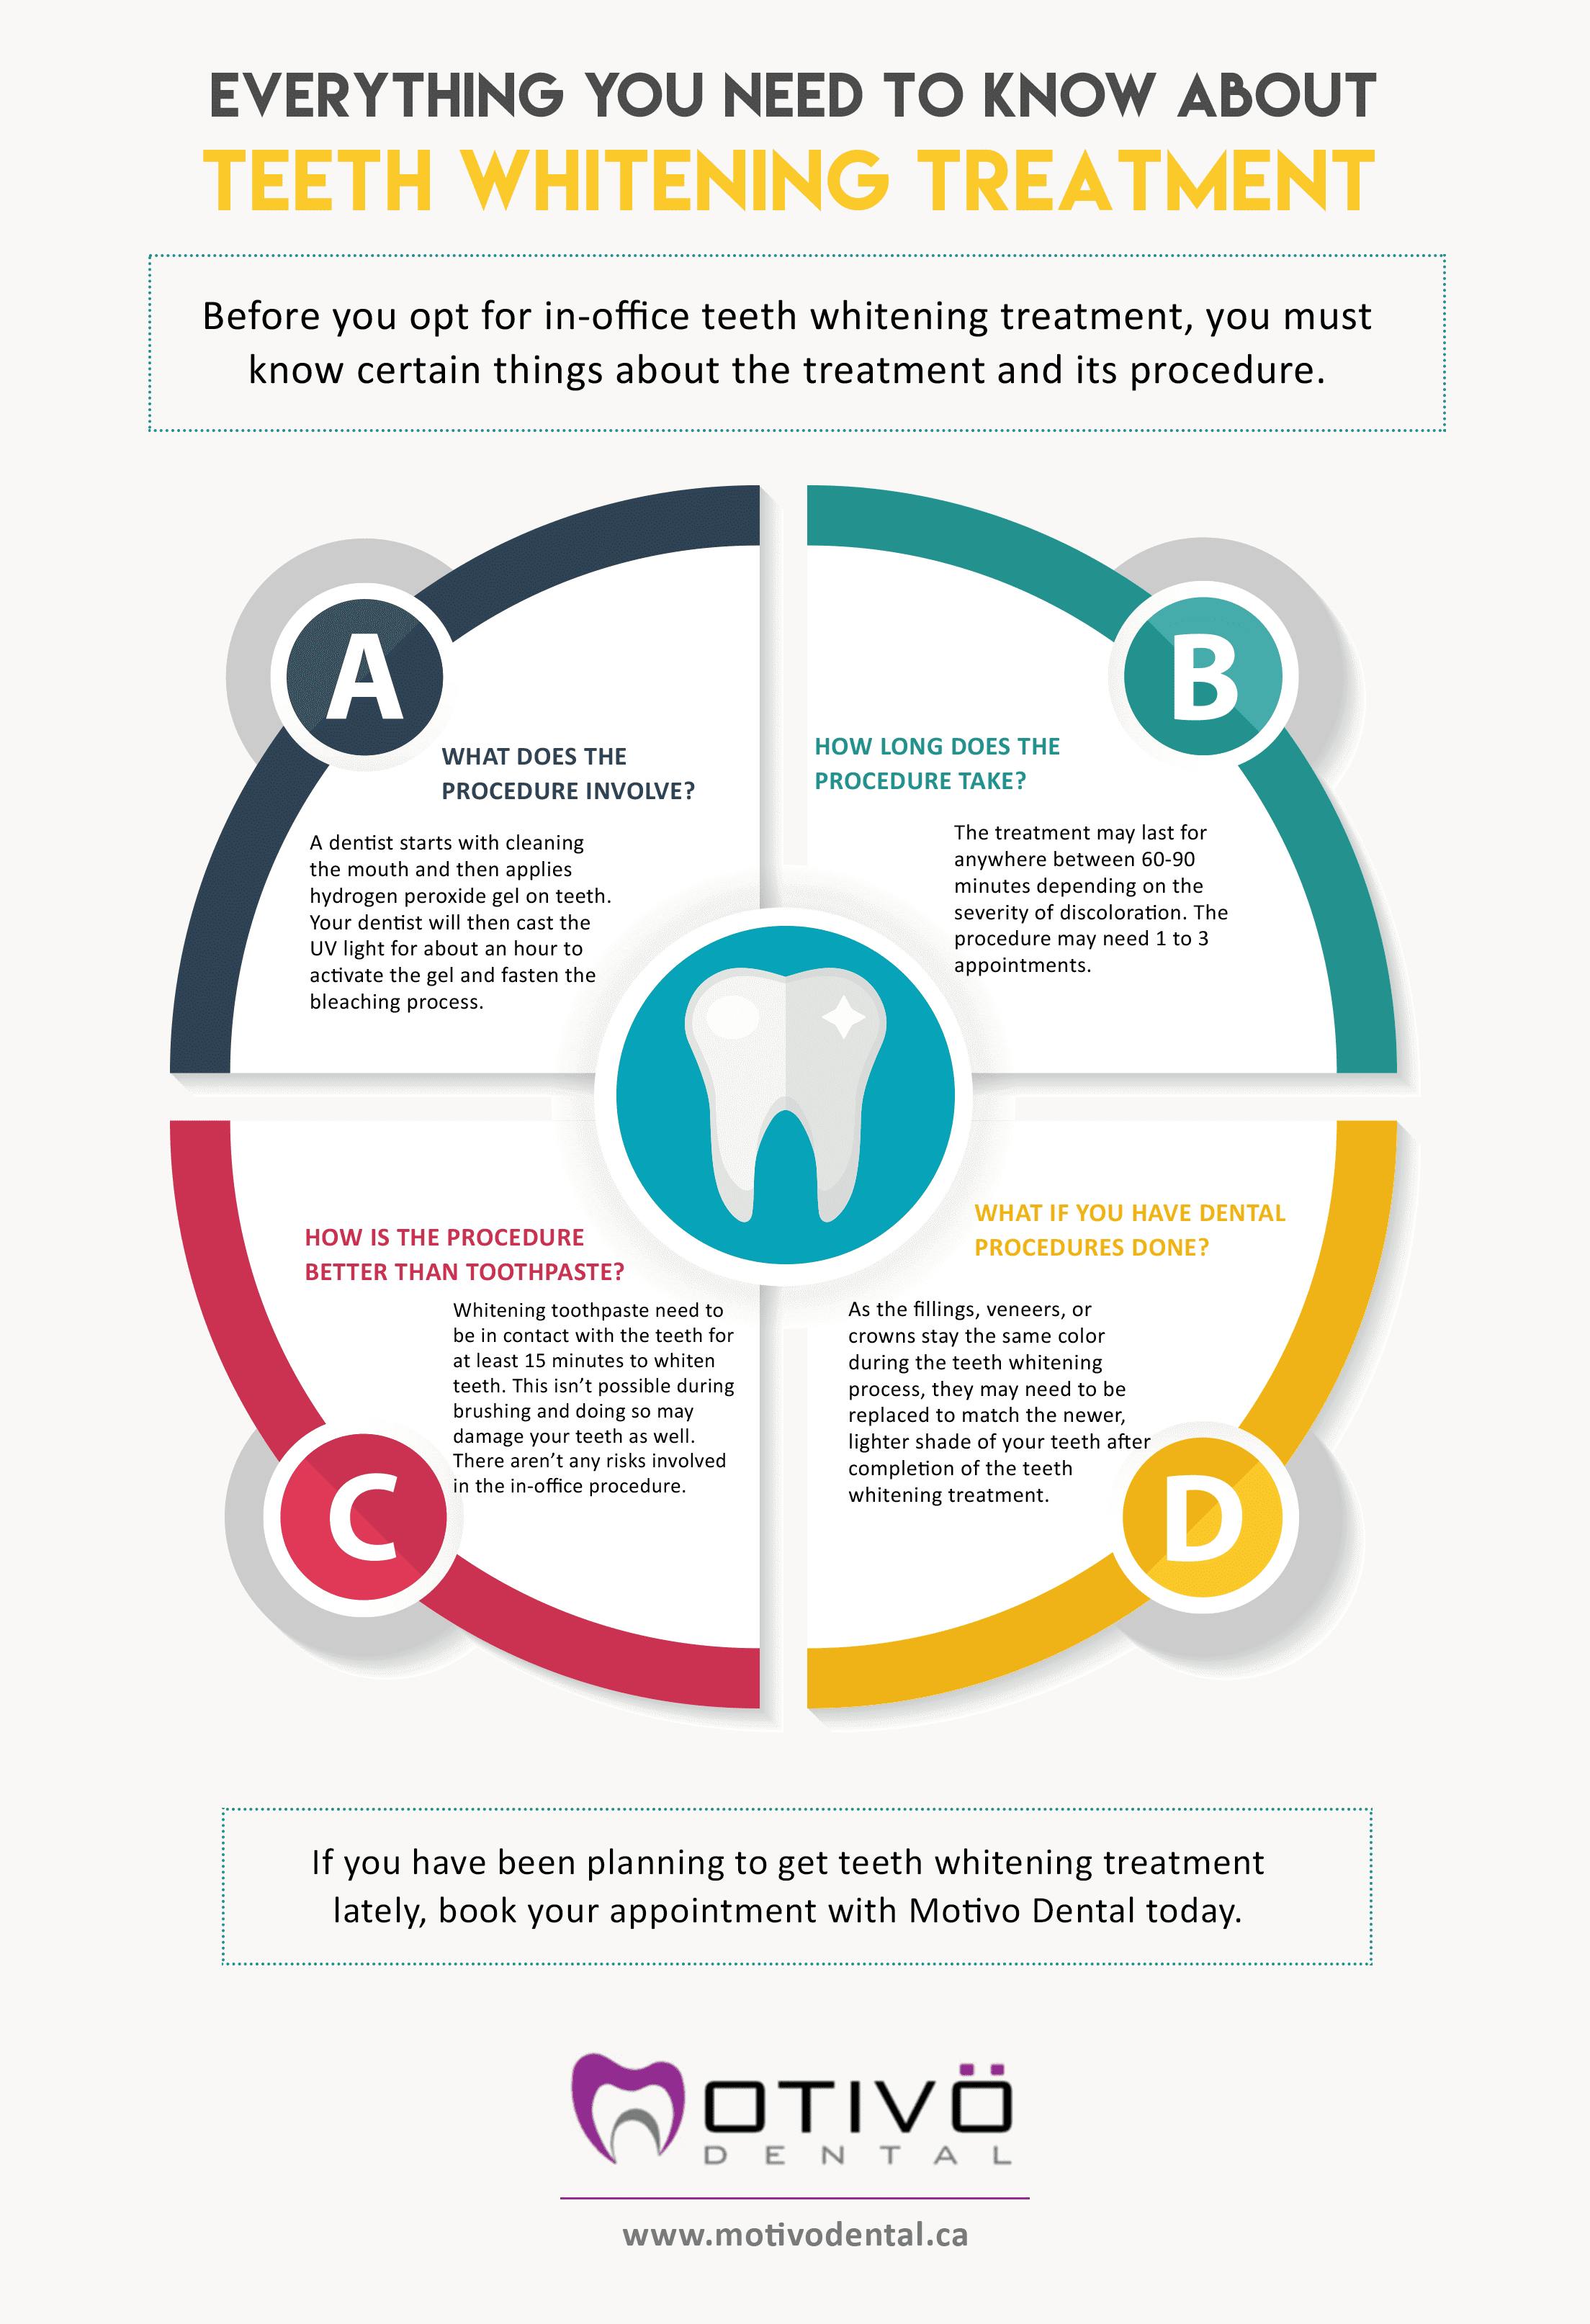 Everything You Need To Know About Teeth Whitening Treatment - Dentist  Edmonton